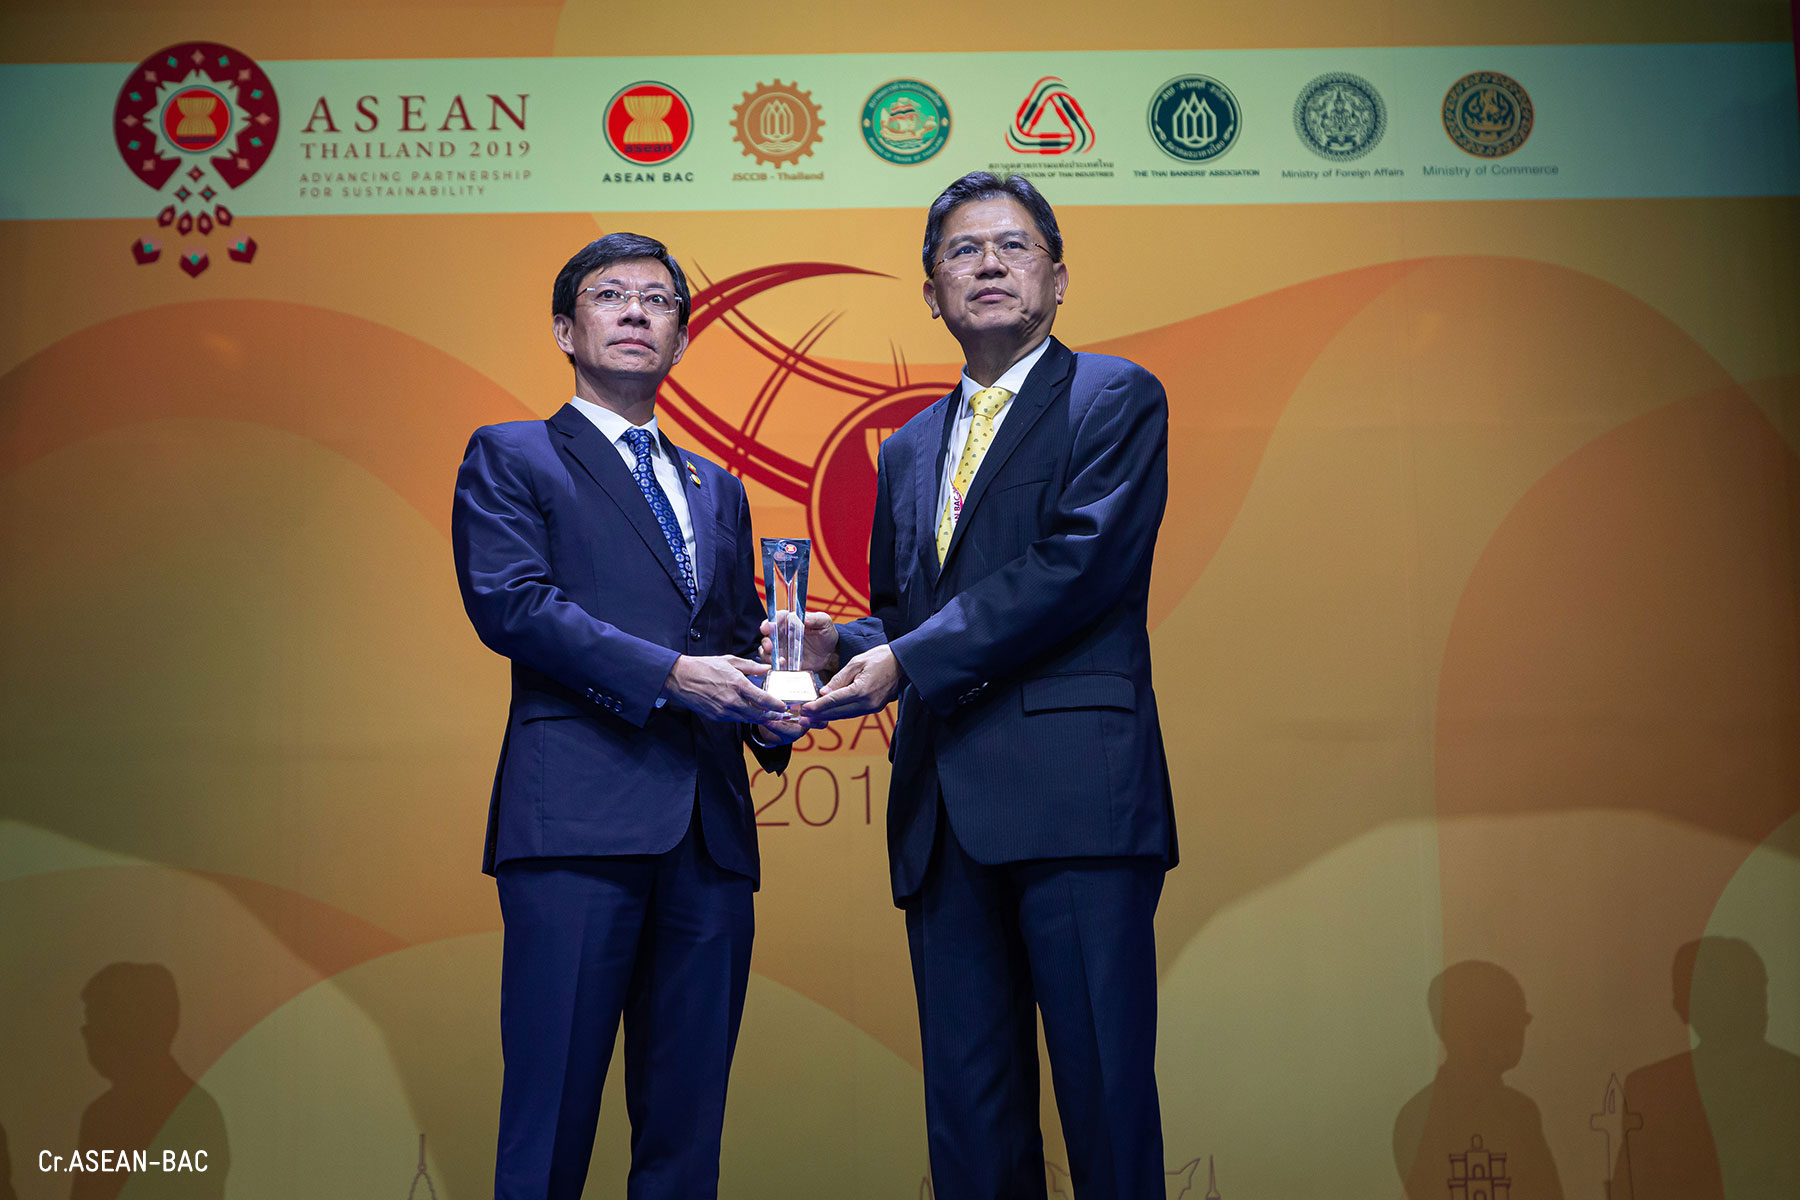 Sea Lion receiving trophy Dr. Win Zaw Aung, Group CEO of Sea Lion Group and Mr. Predee Daochai, Chairman of the Thai Bankers’ Association